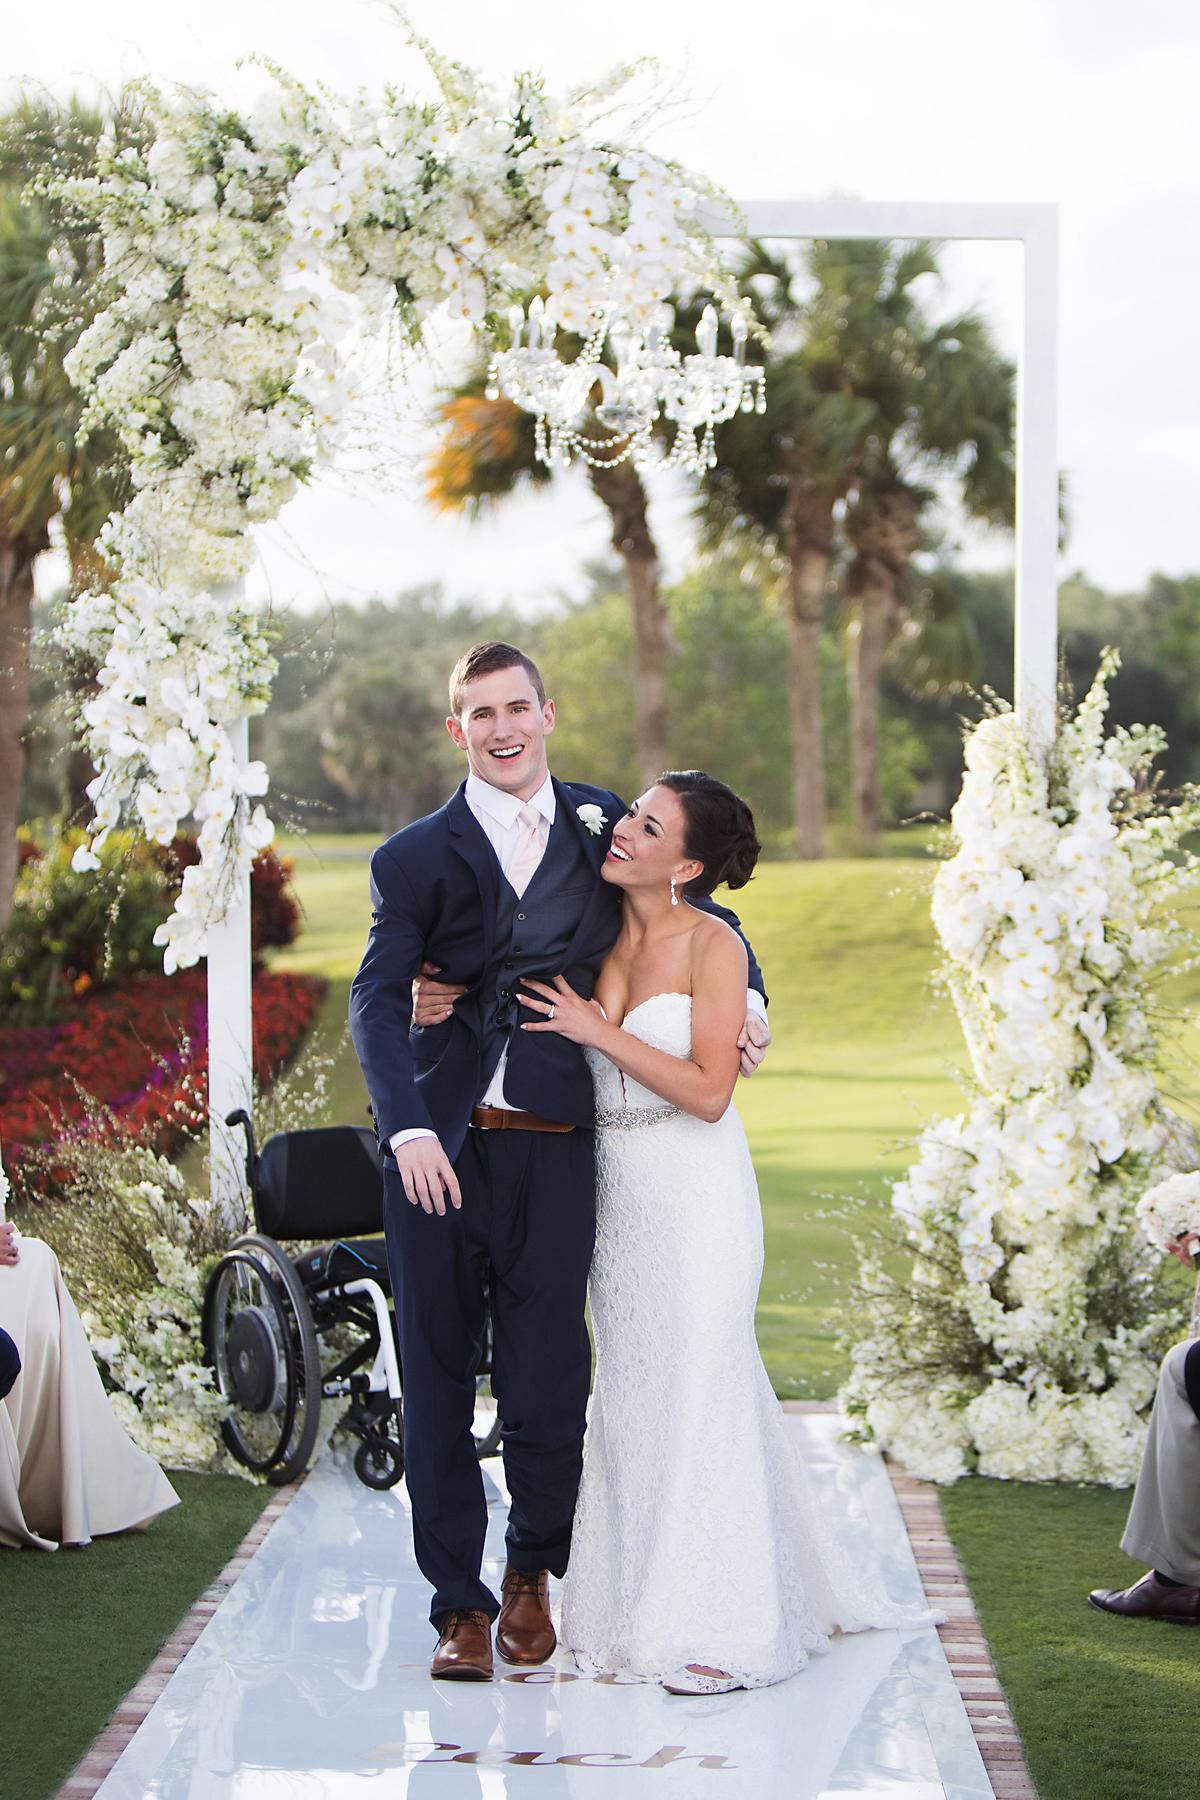  Chris Norton walking down the aisle with his wife, Emily Summers, in Jupiter, Fla., on April 21, 2018. (Courtesy of Sarah Kate/Fotolanthropy)